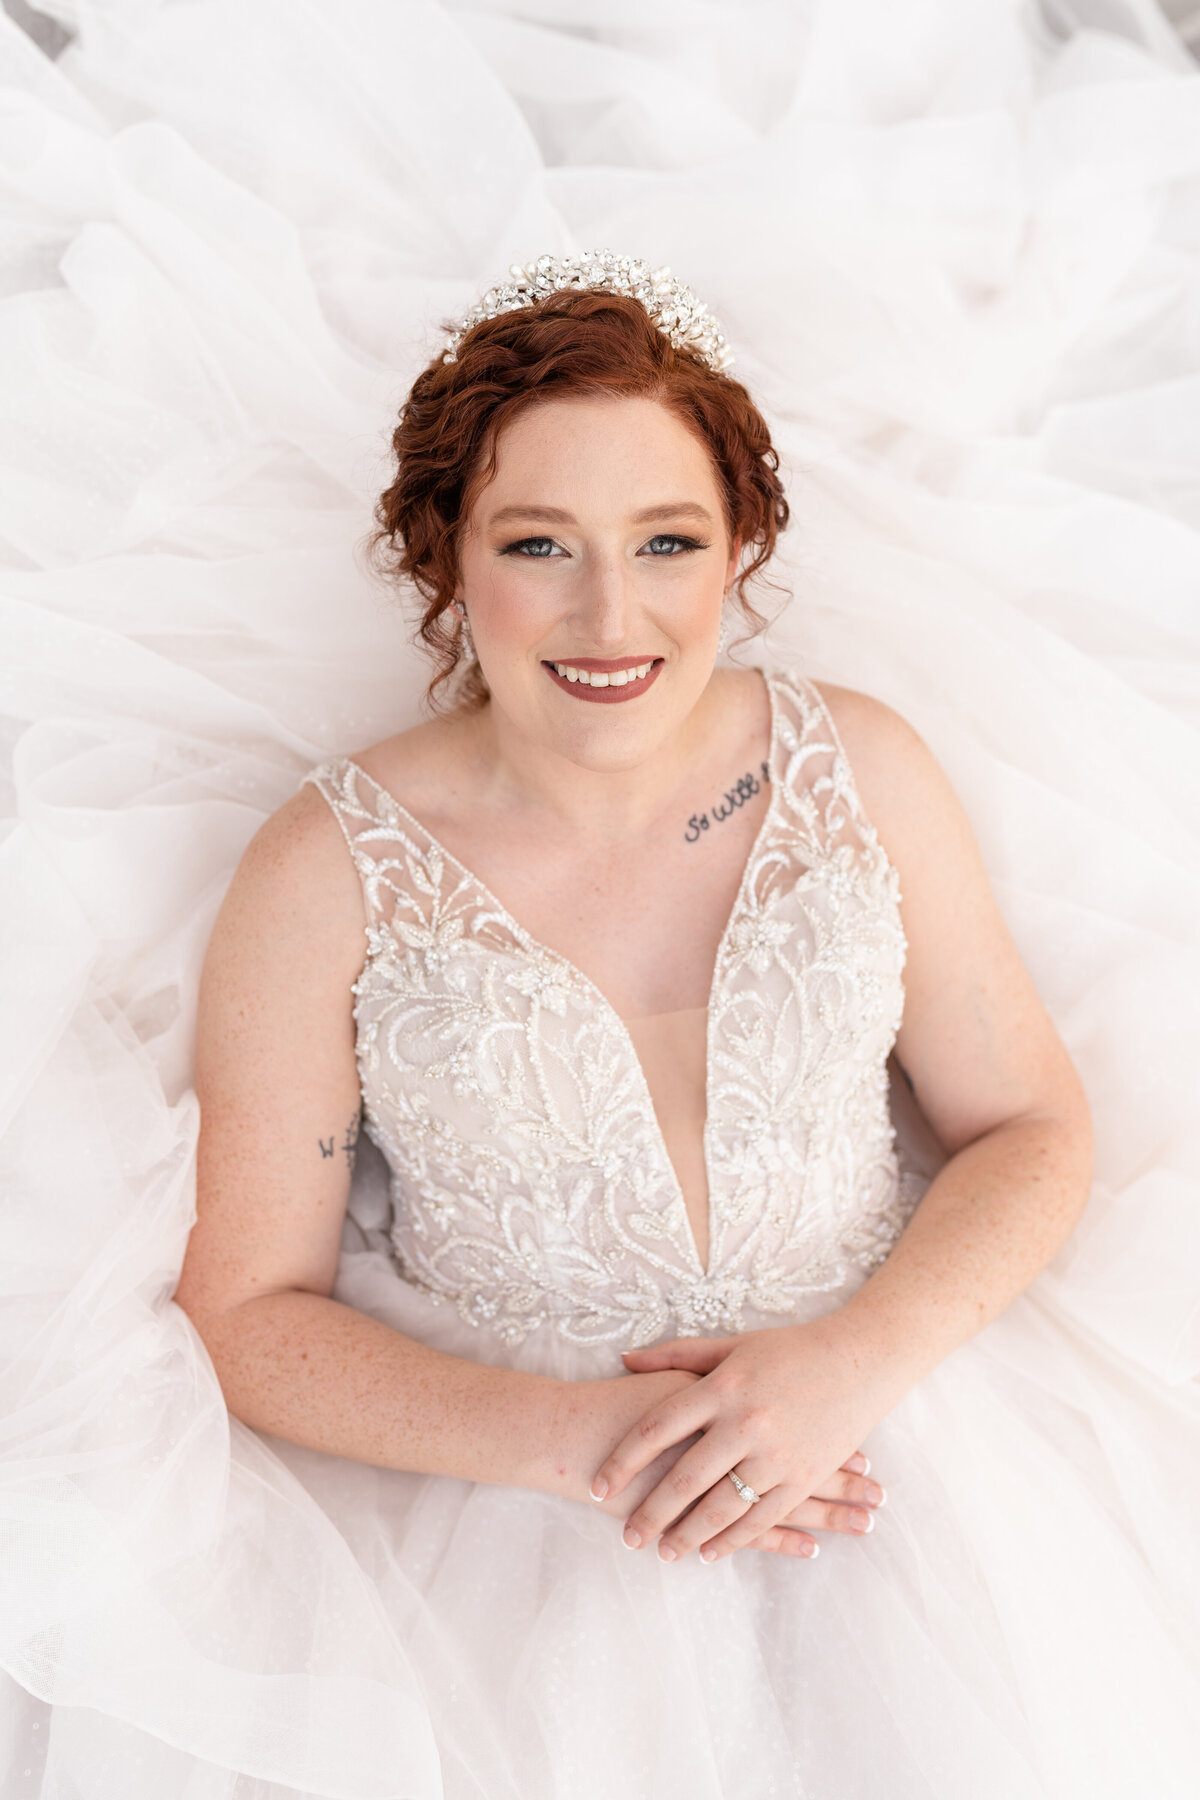 Bride laying down in bridal gown and tiara while smiling up at camera